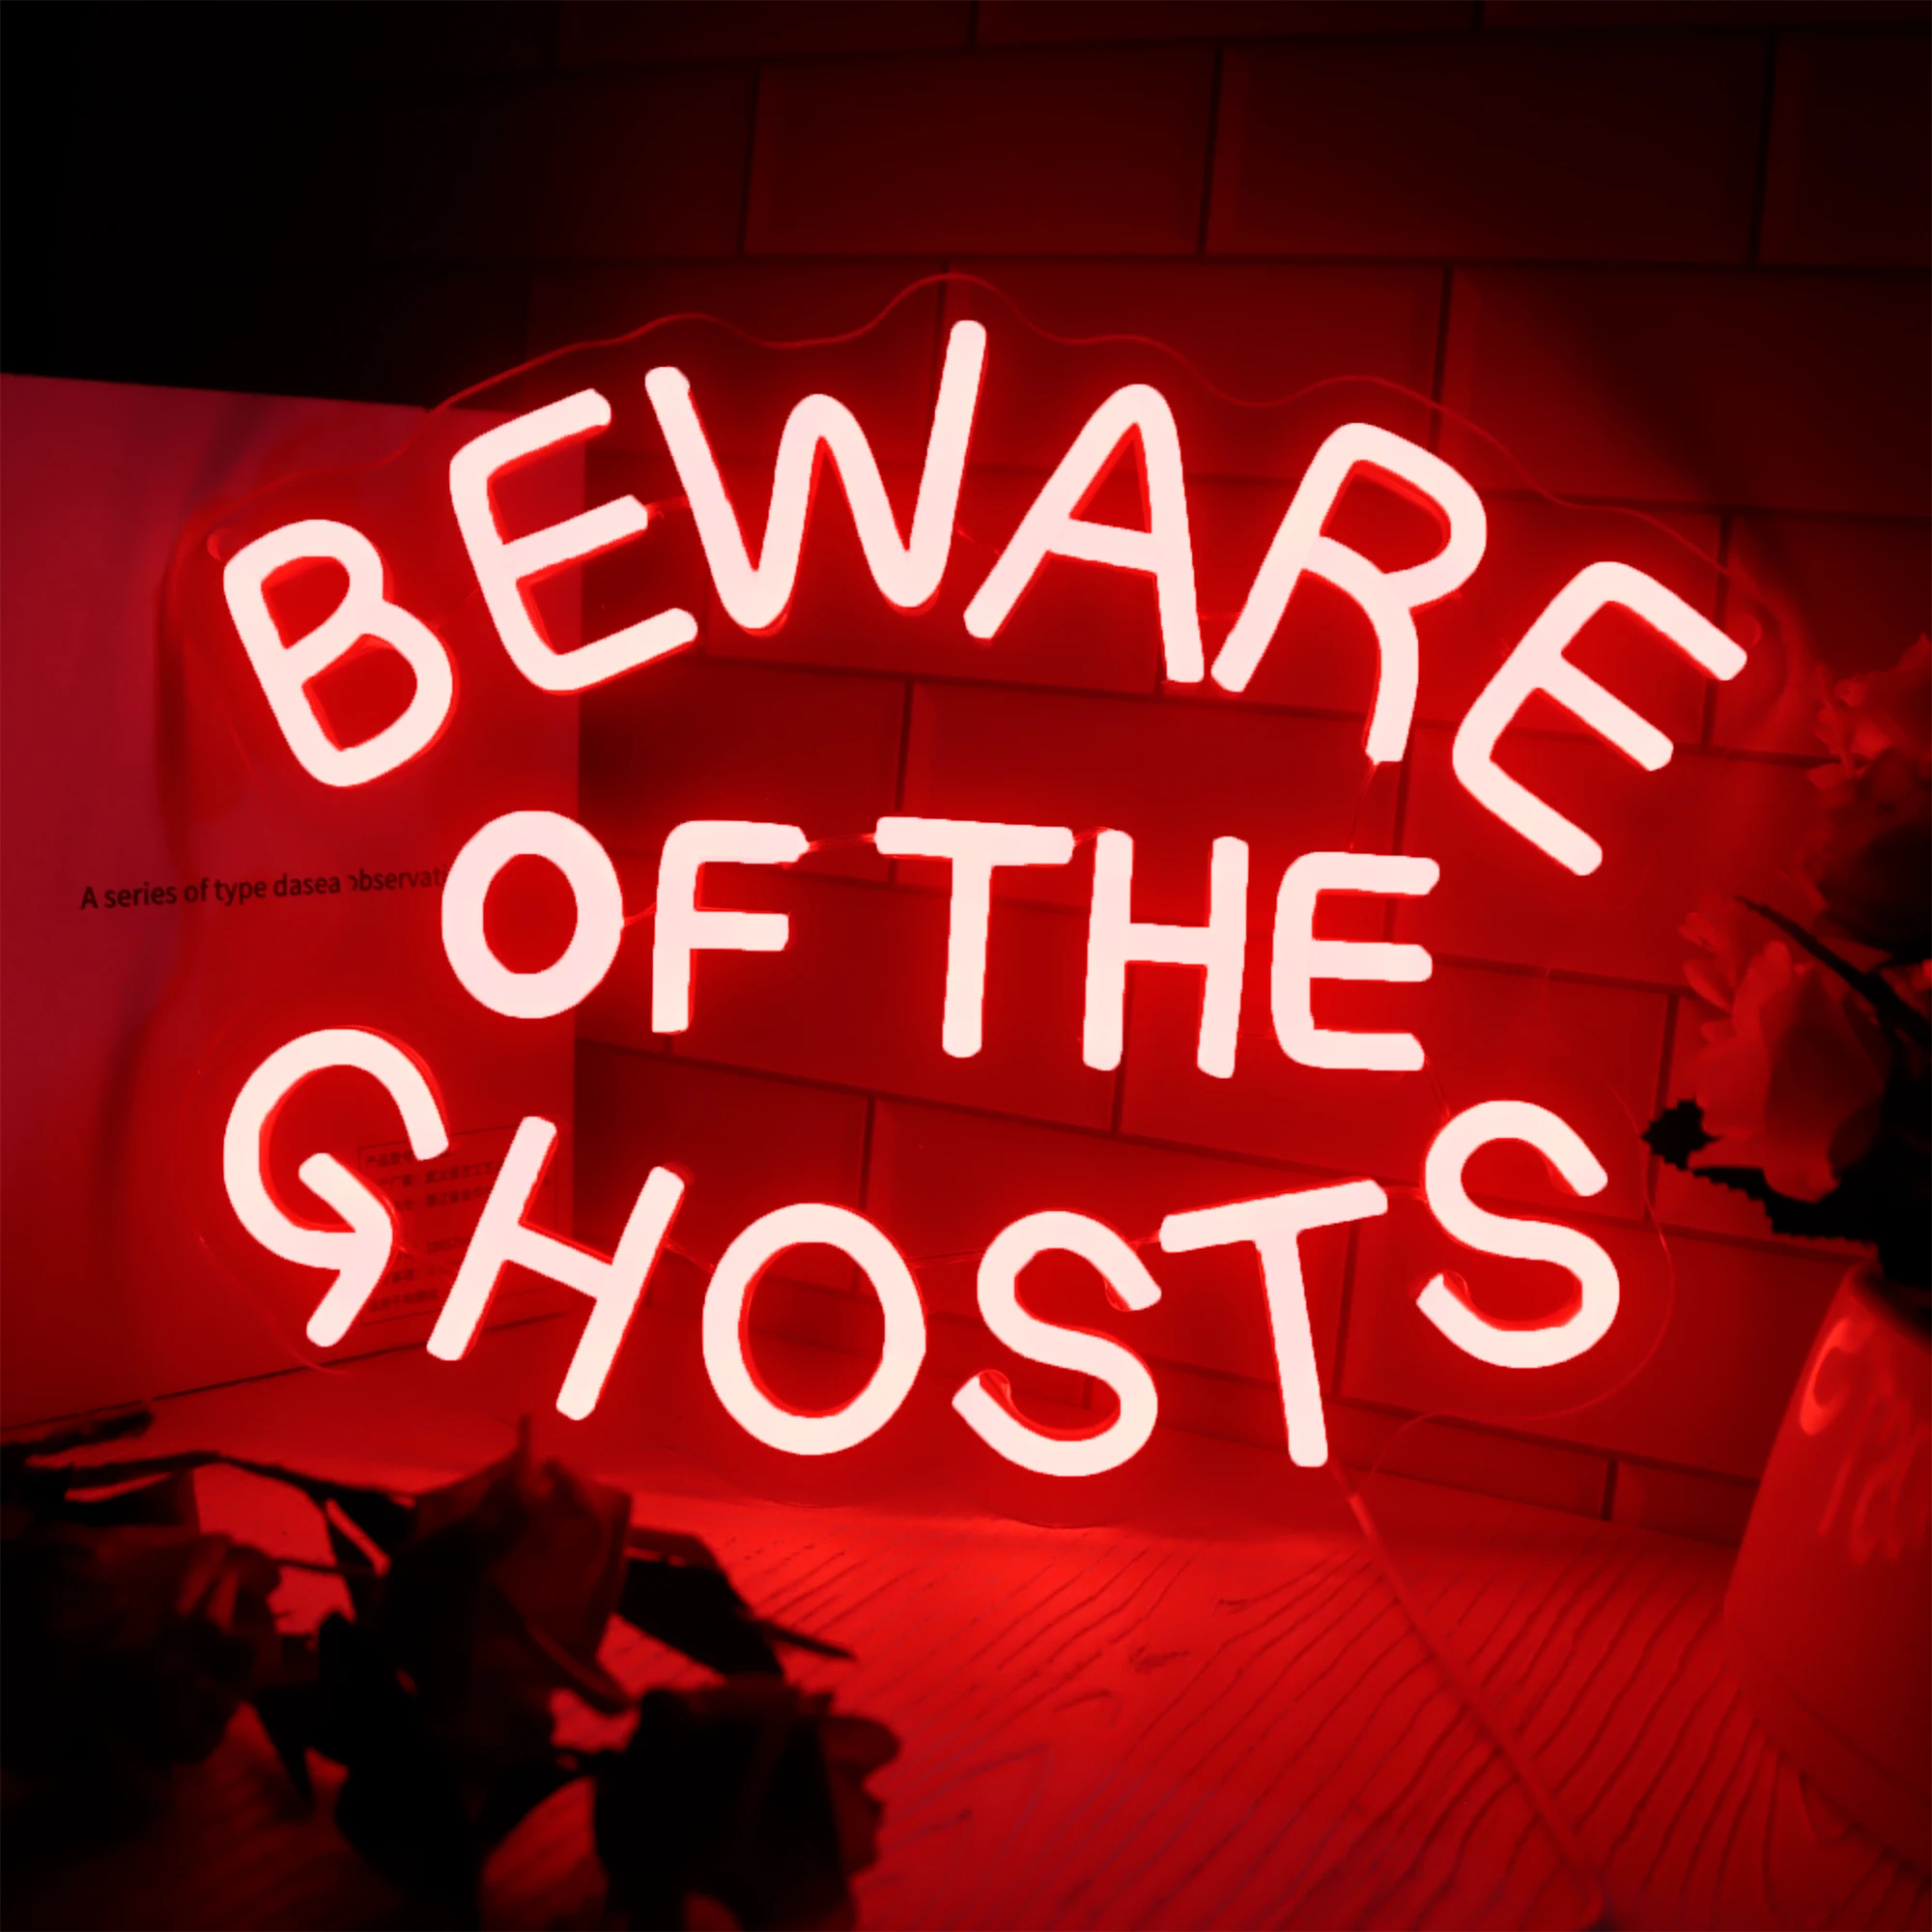 

Beware of the ghosts Neon Sign Halloween Decorations Funky Party Neon Sign Halloween LED Light Halloween Spooky Wall Decoration